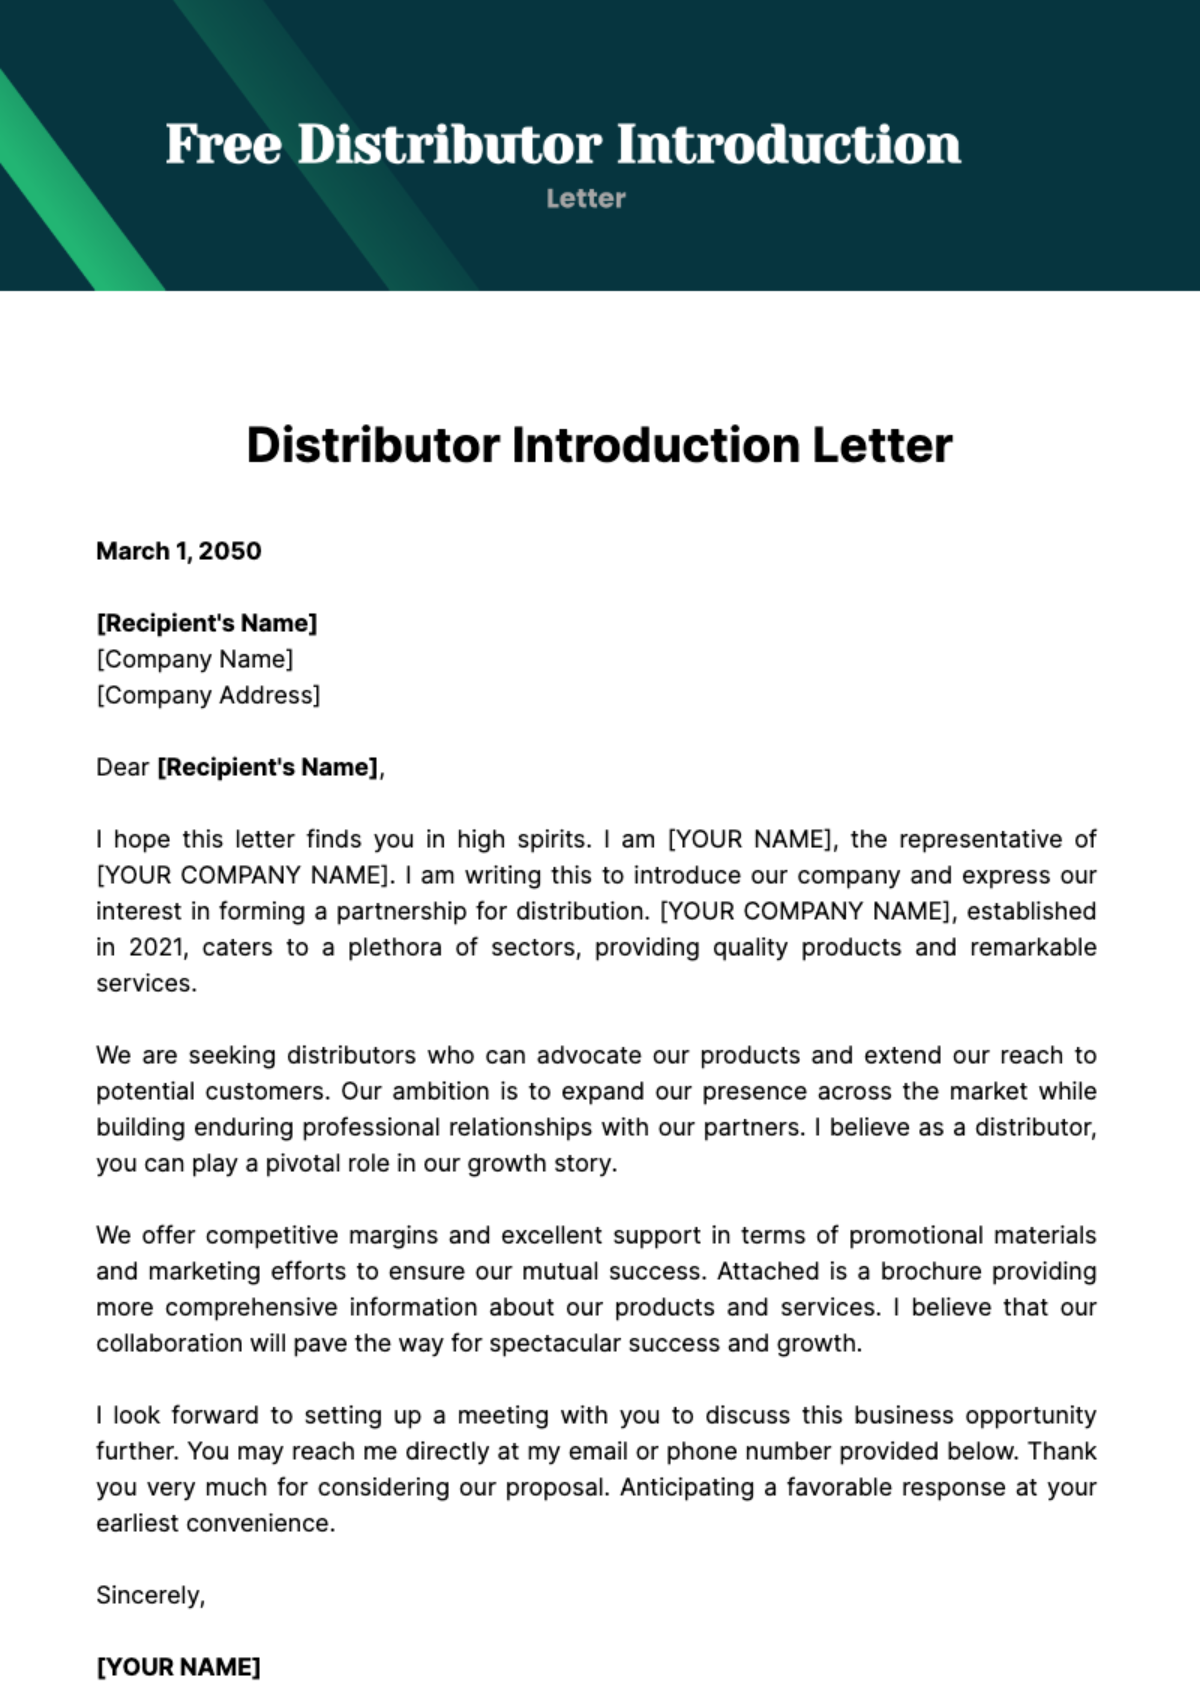 Free Distributor Introduction Letter Template